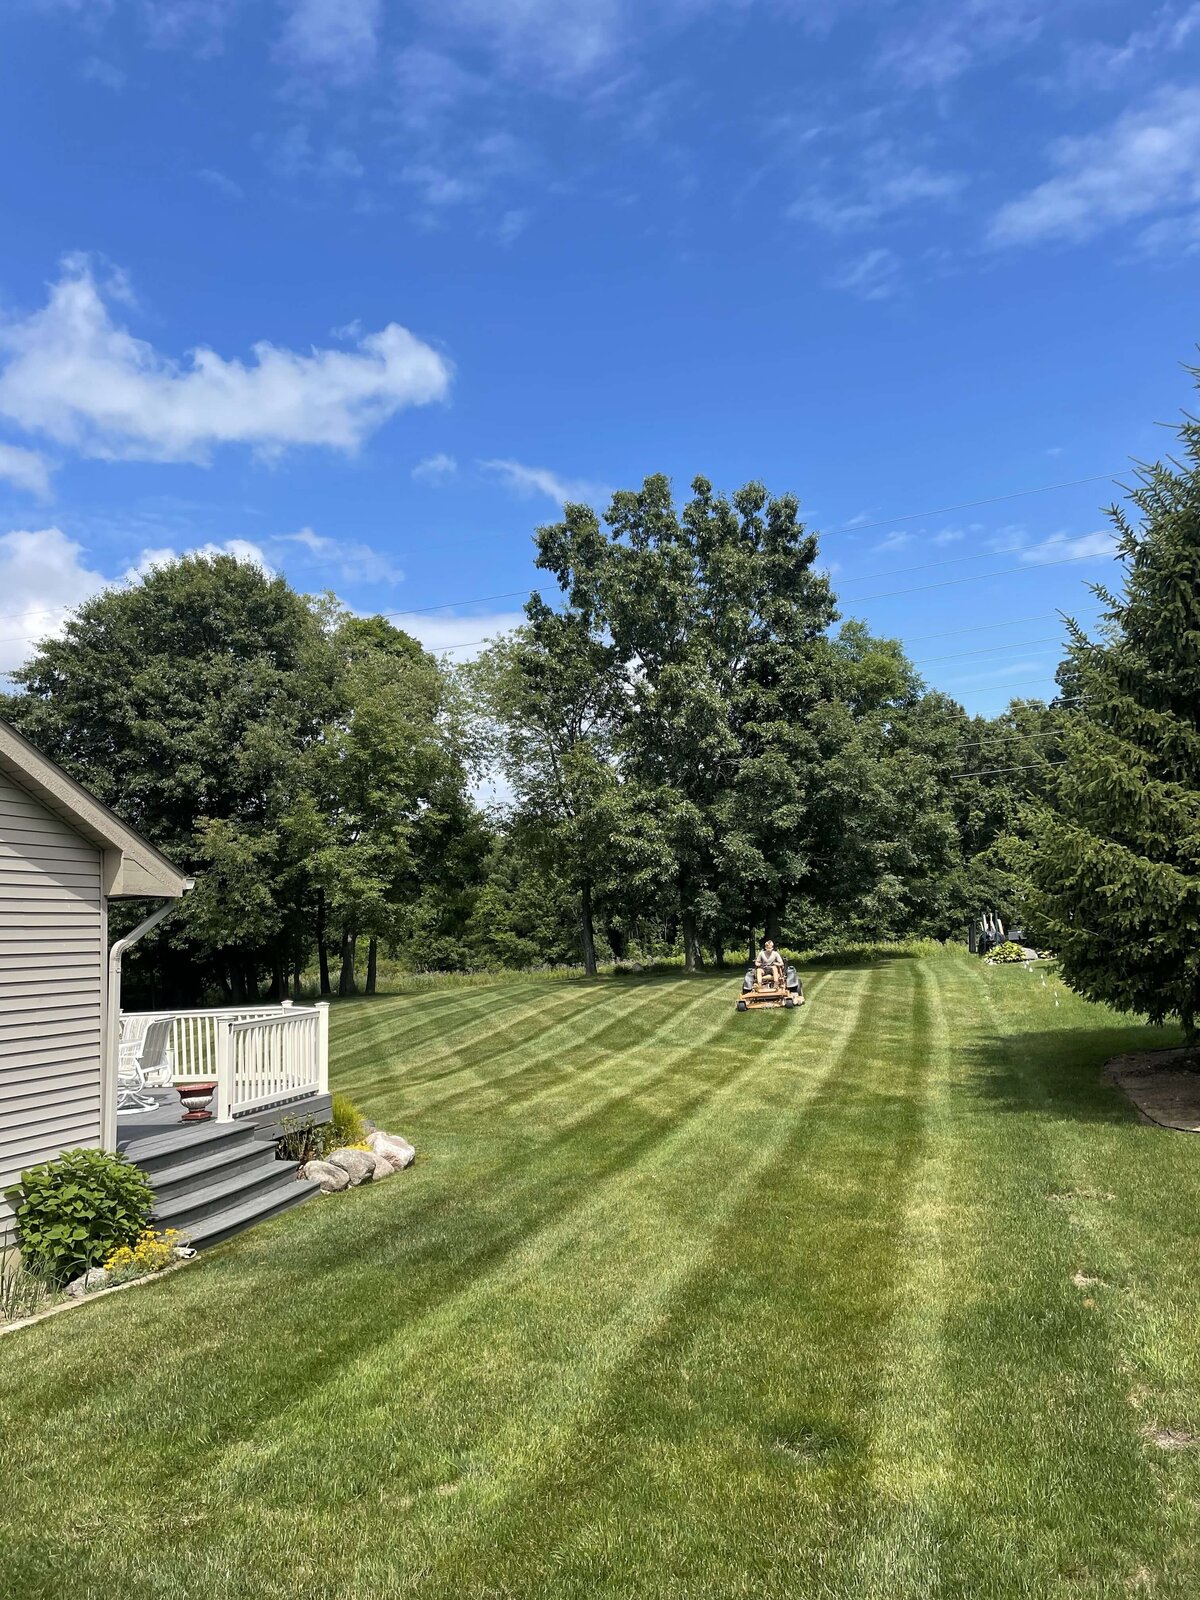 et-landscaping-howell-michigan-lawn-mowing-residential